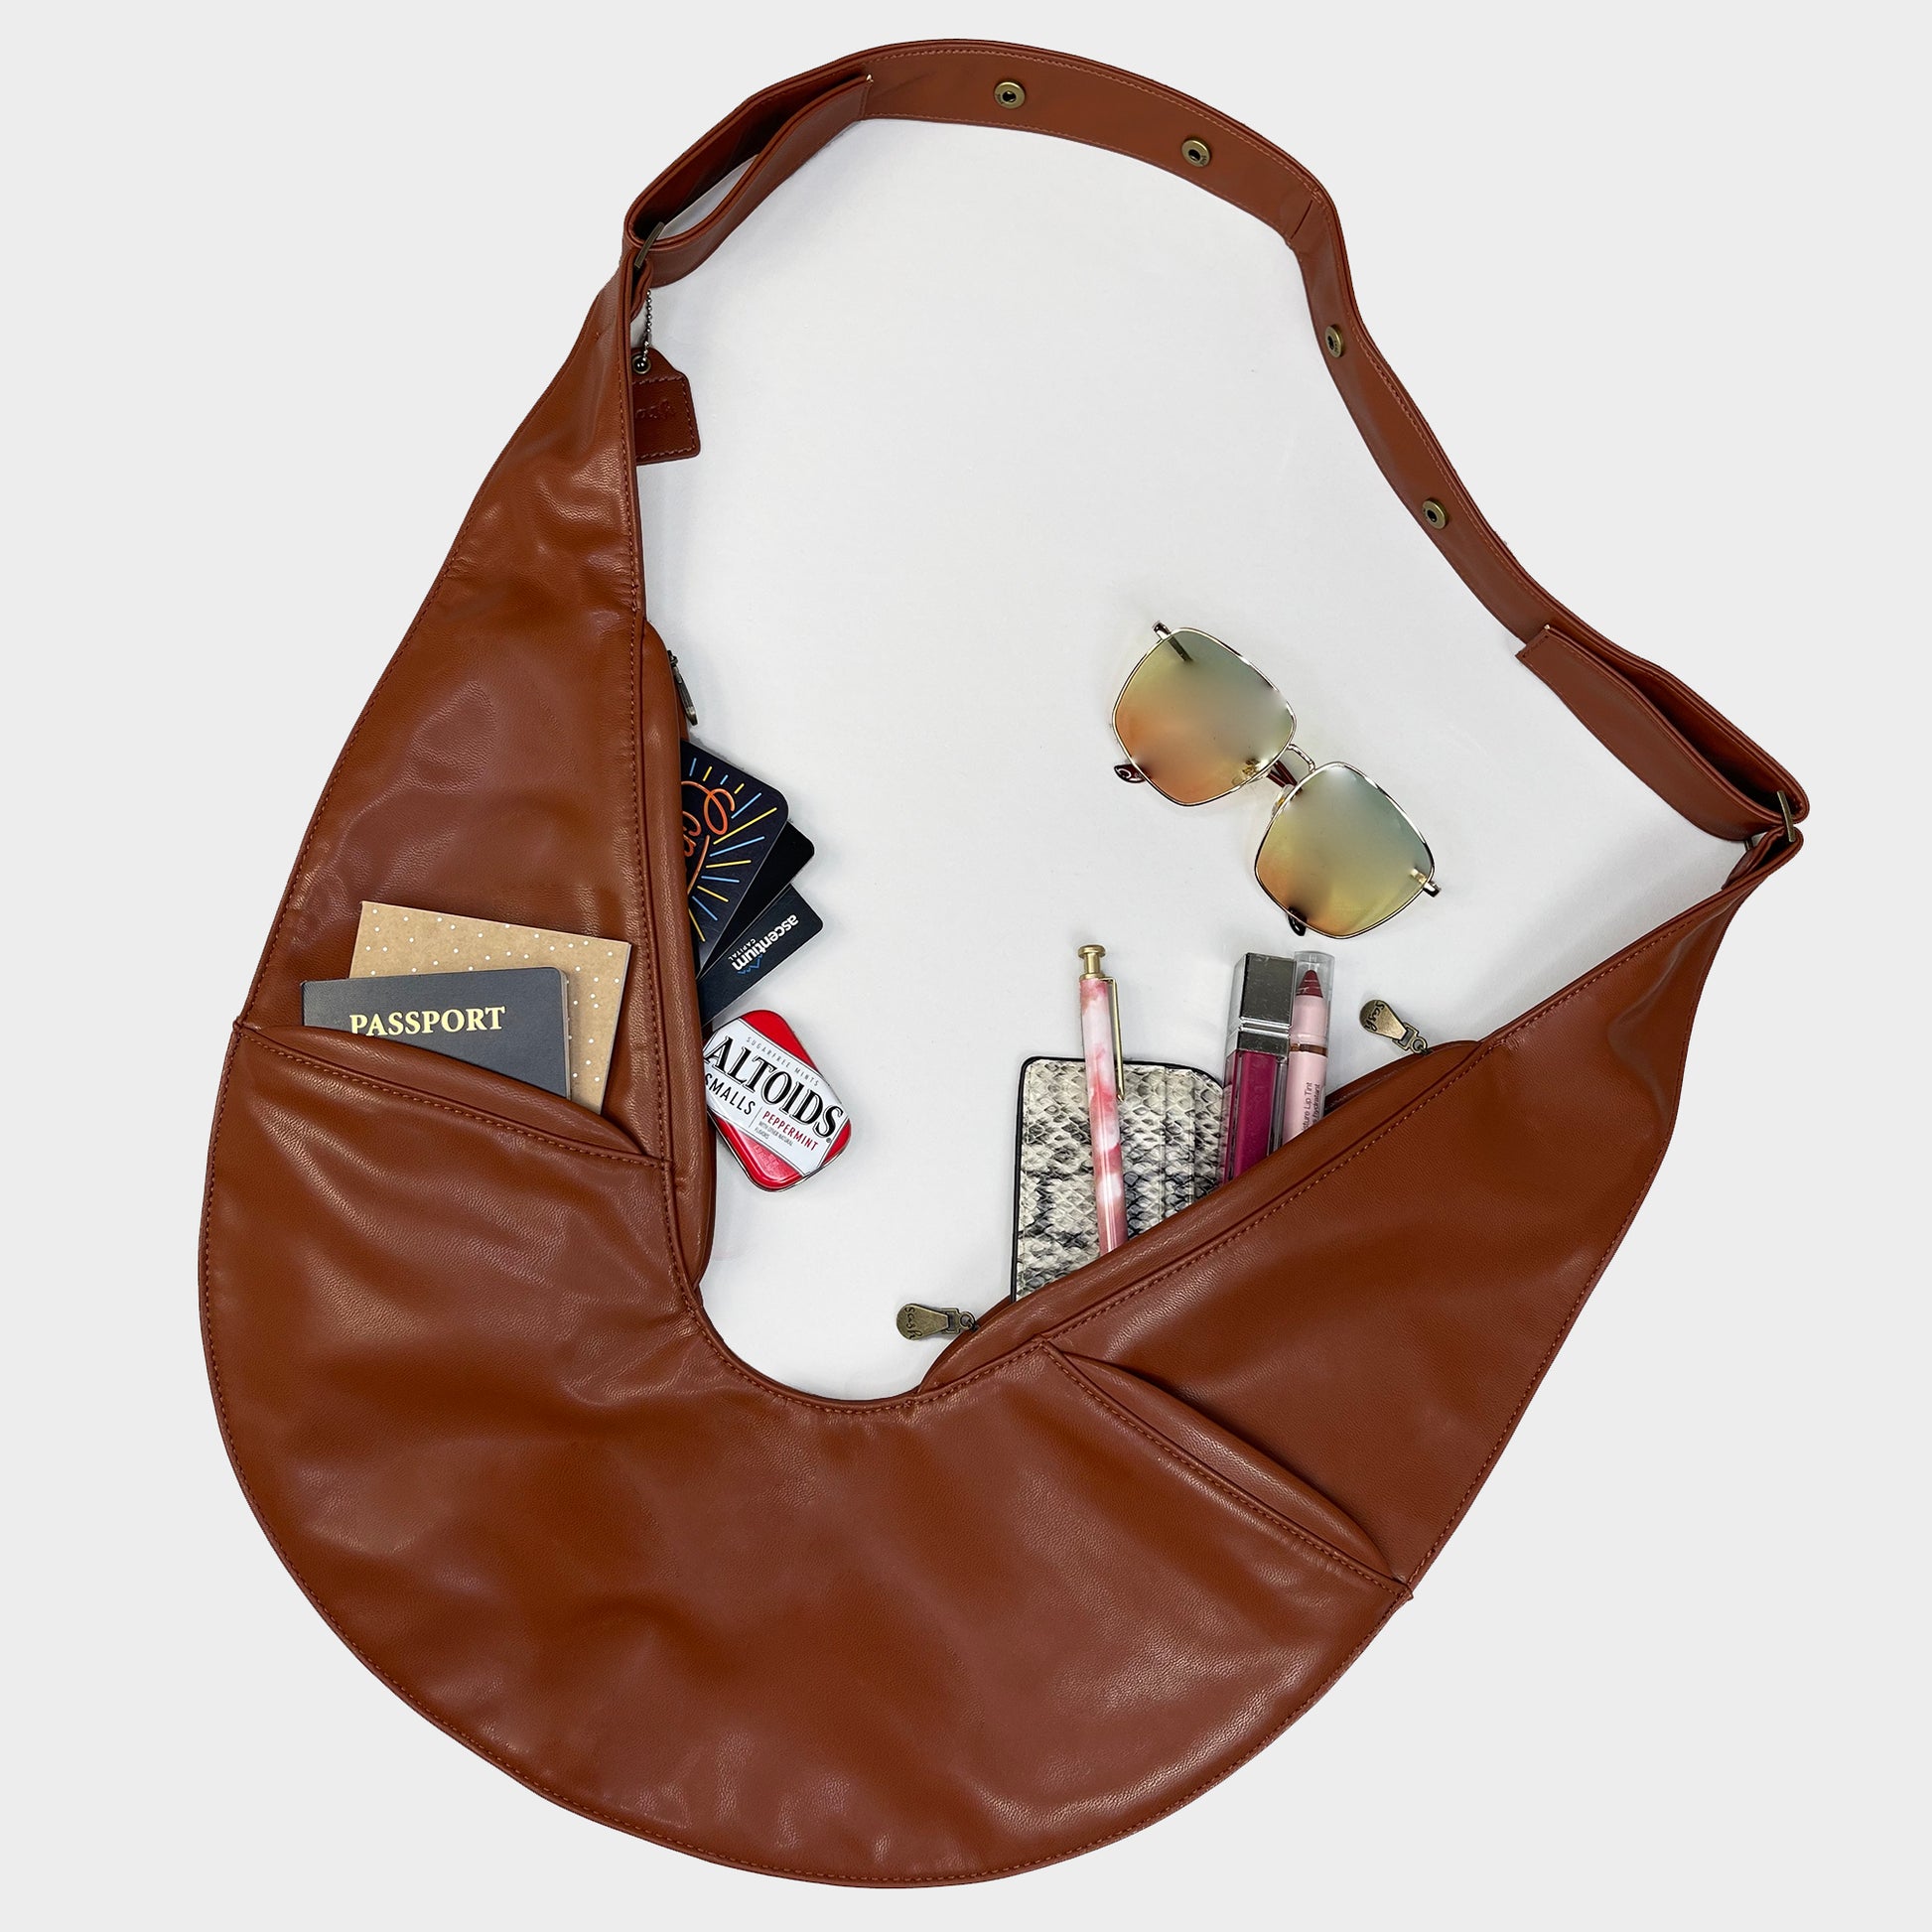 Faux Leather One Handle Bag